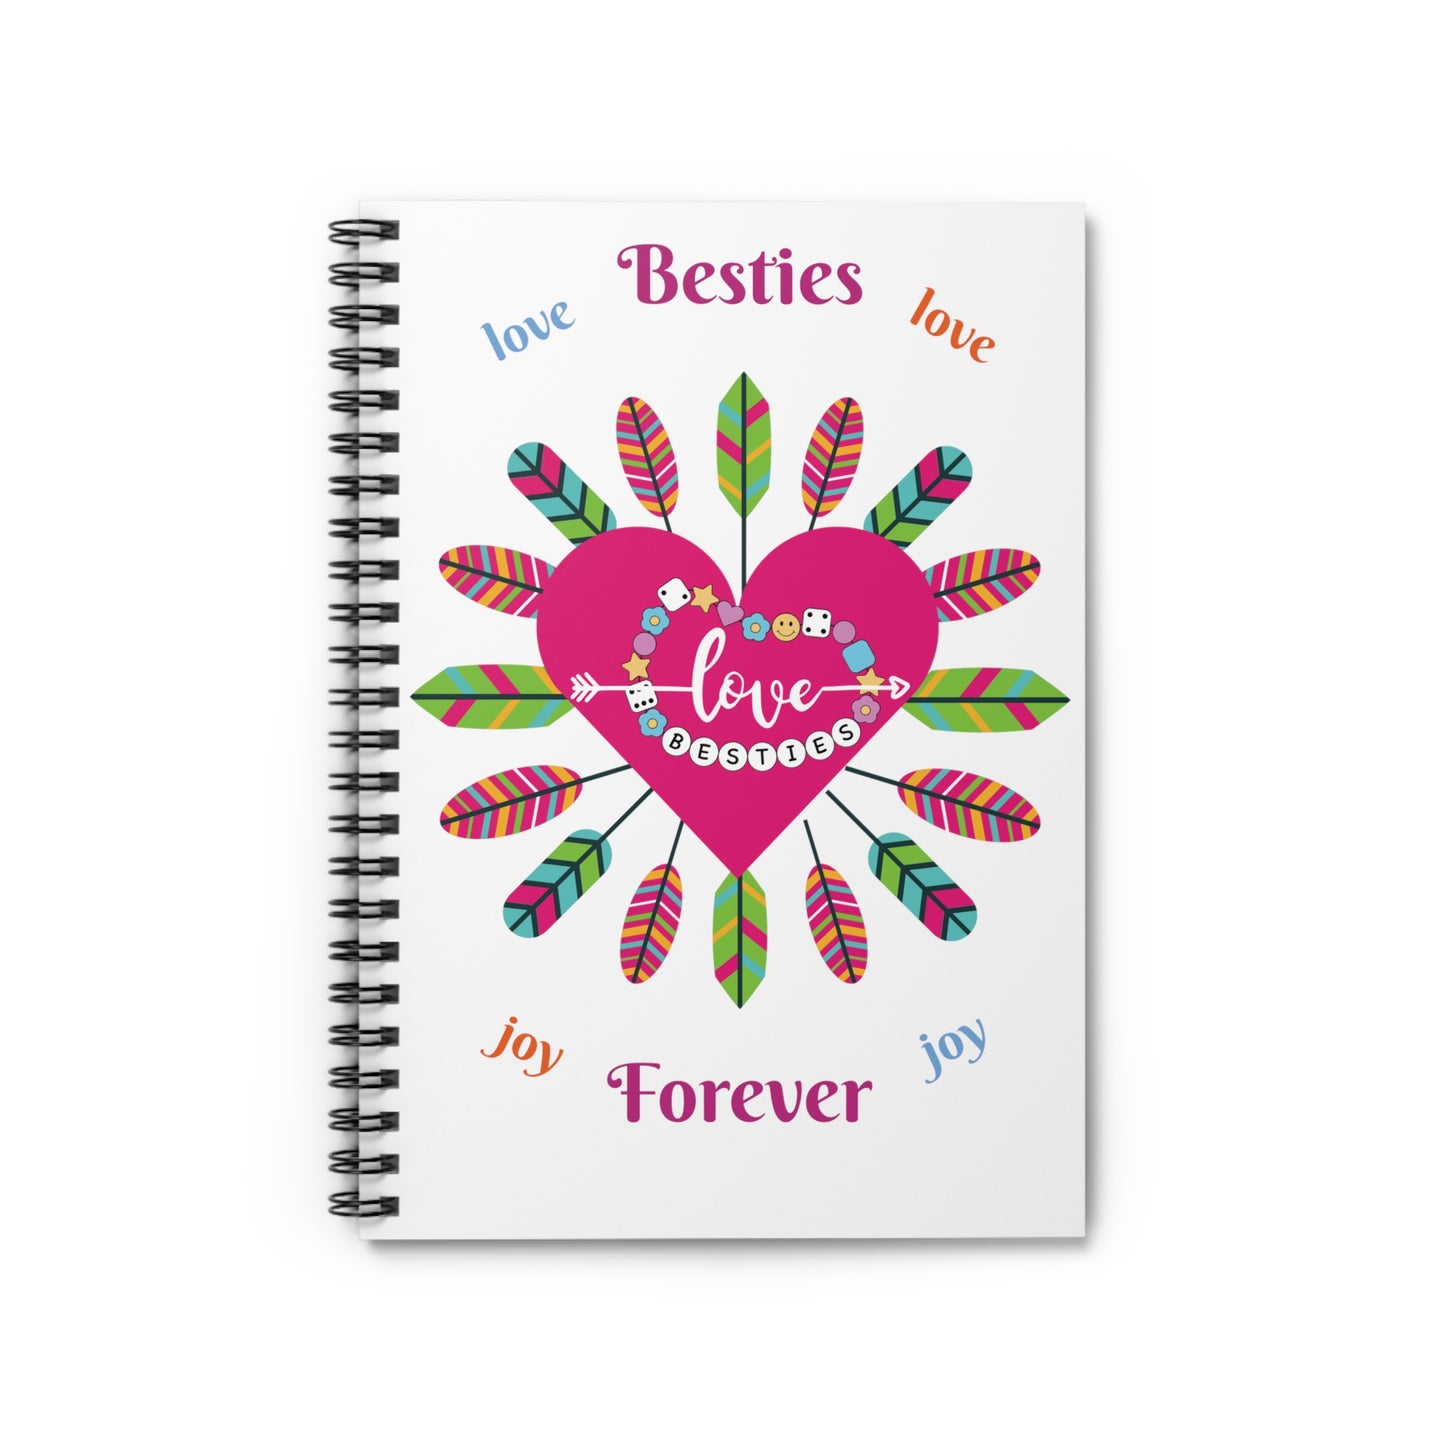 Besties Forever Spiral Notebook - Ruled Line